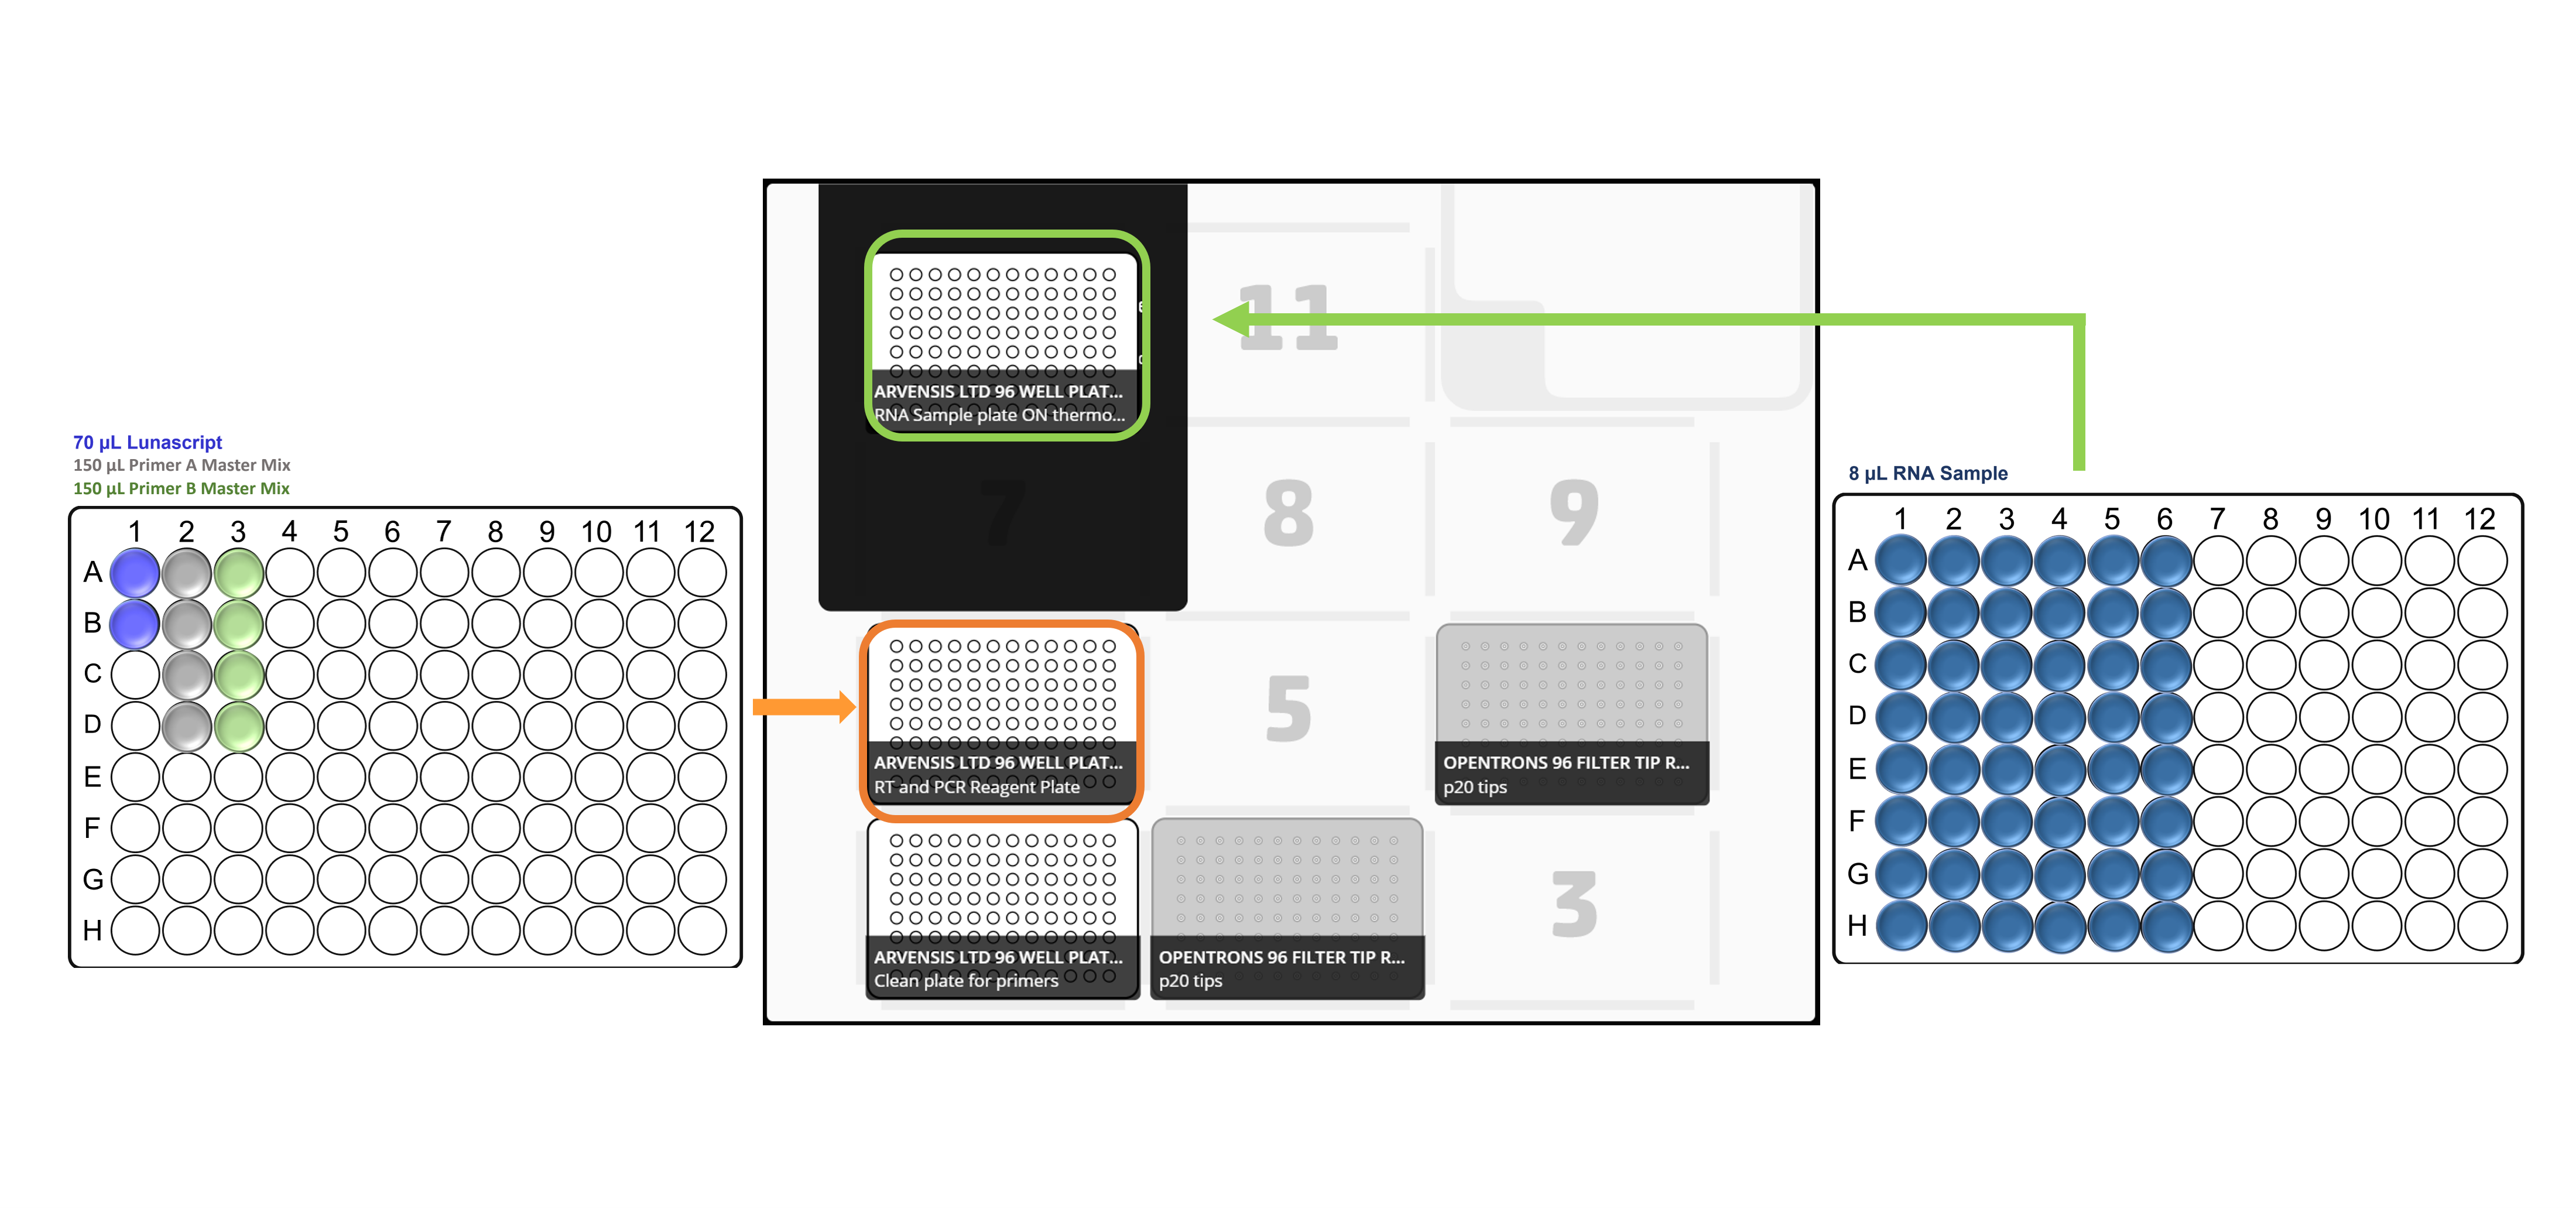 Opentrons Pre Deck layout x48